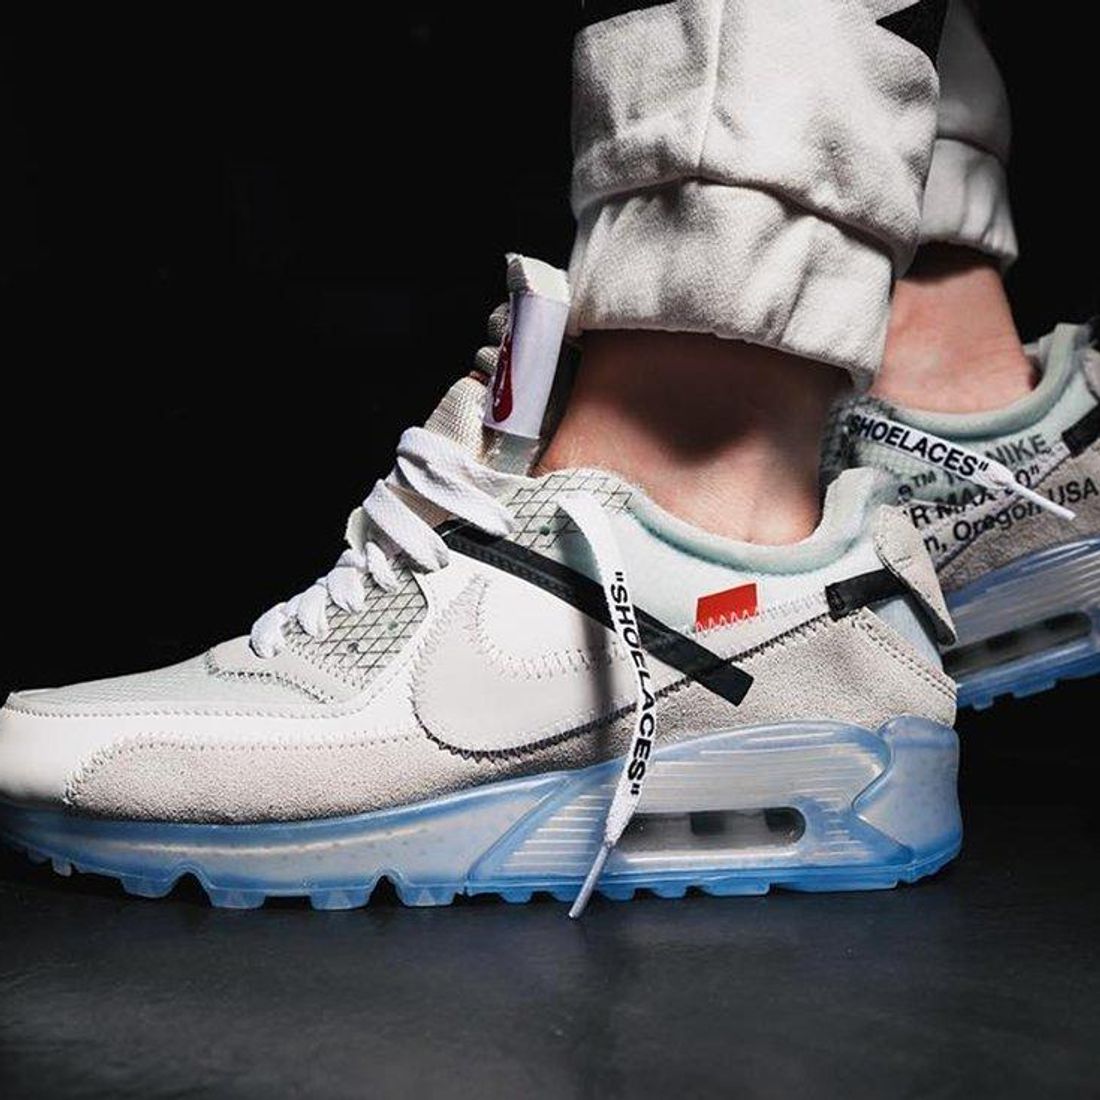 Off-White™ x Nike Air Max 90 Collab On-Foot